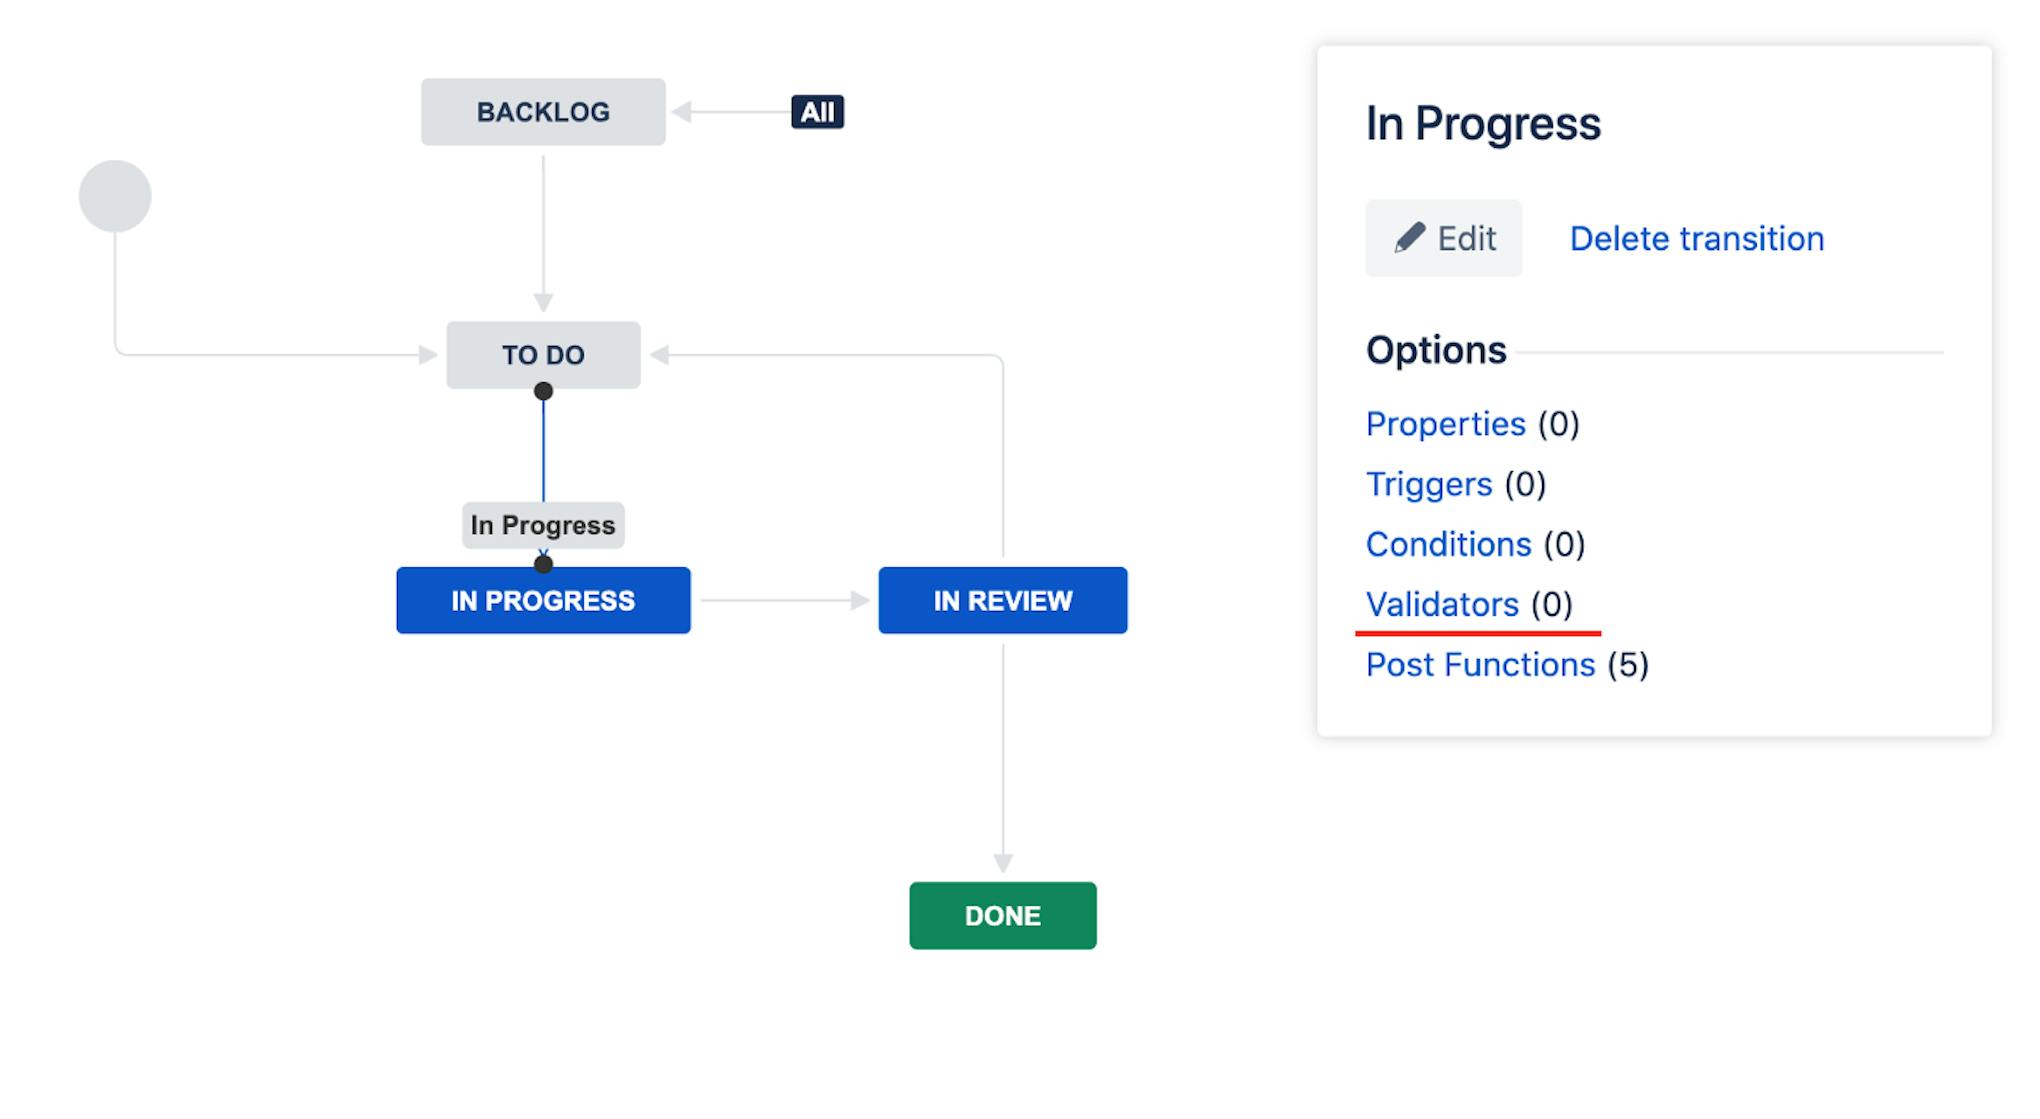 The transition from To Do to the In Progress Status in Jira Software.